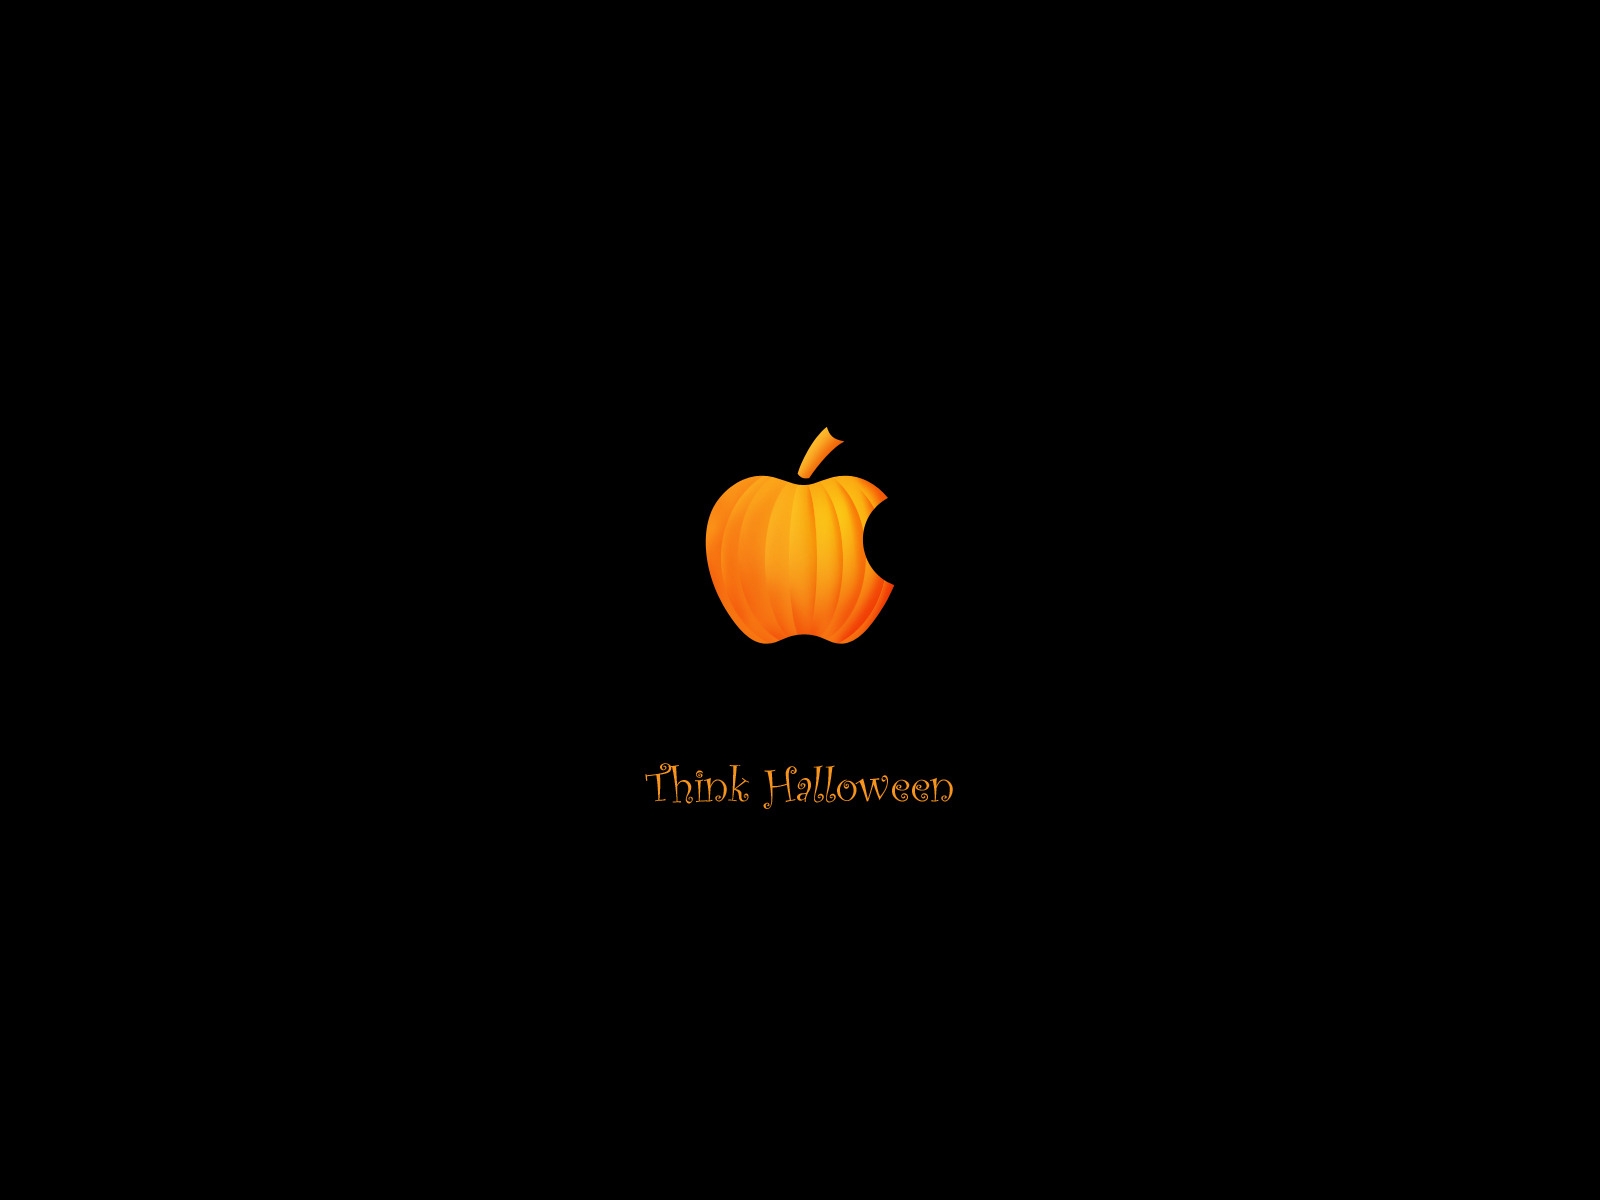 Think Halloween for 1600 x 1200 resolution